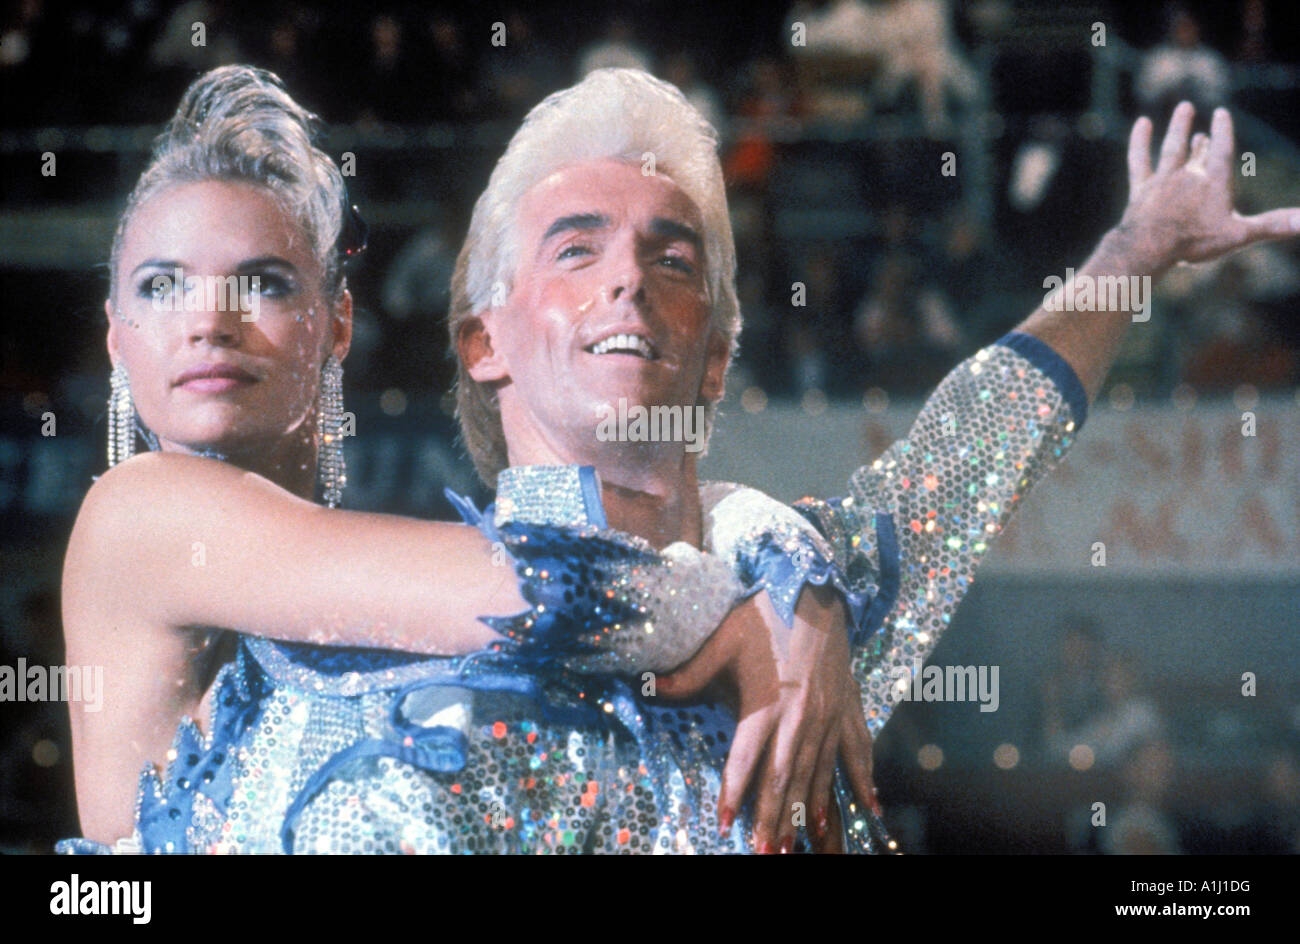 Strictly Ballroom Year 1991 Director Baz Luhrmann Gia Carides Peter Whitford Stock Photo